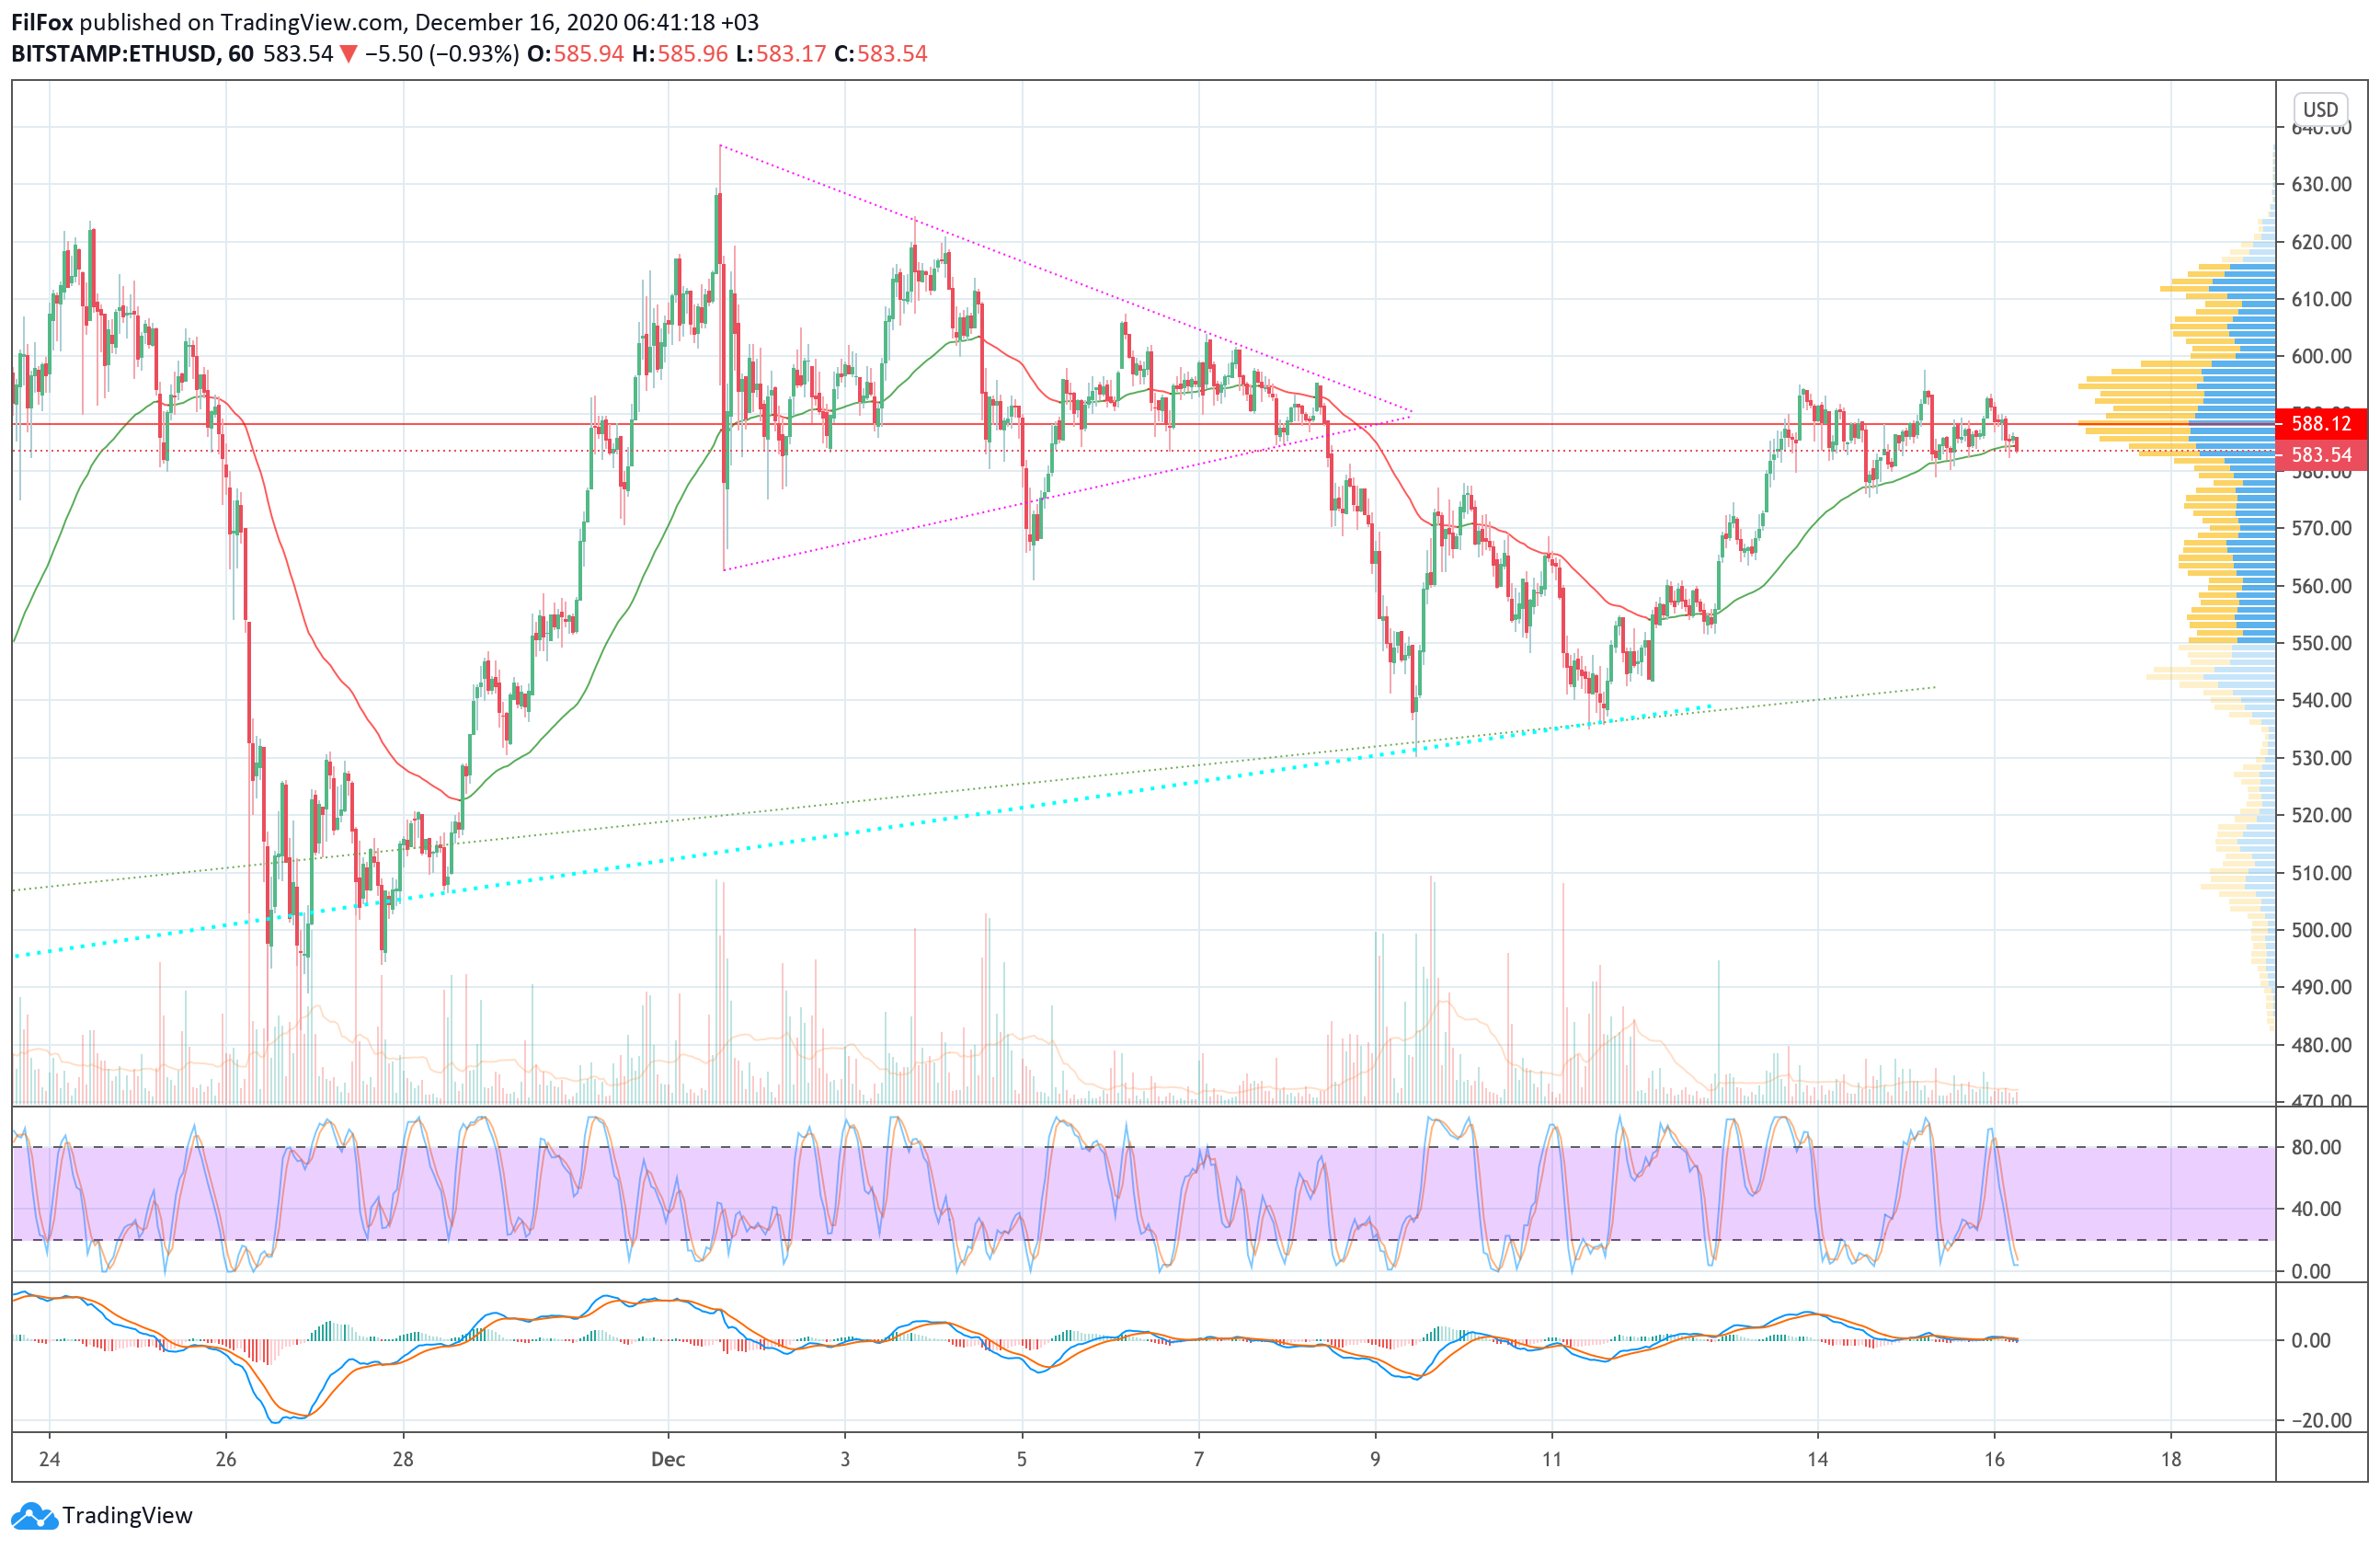 Analysis of the prices of Bitcoin, Ethereum, Ripple for 12/16/2020